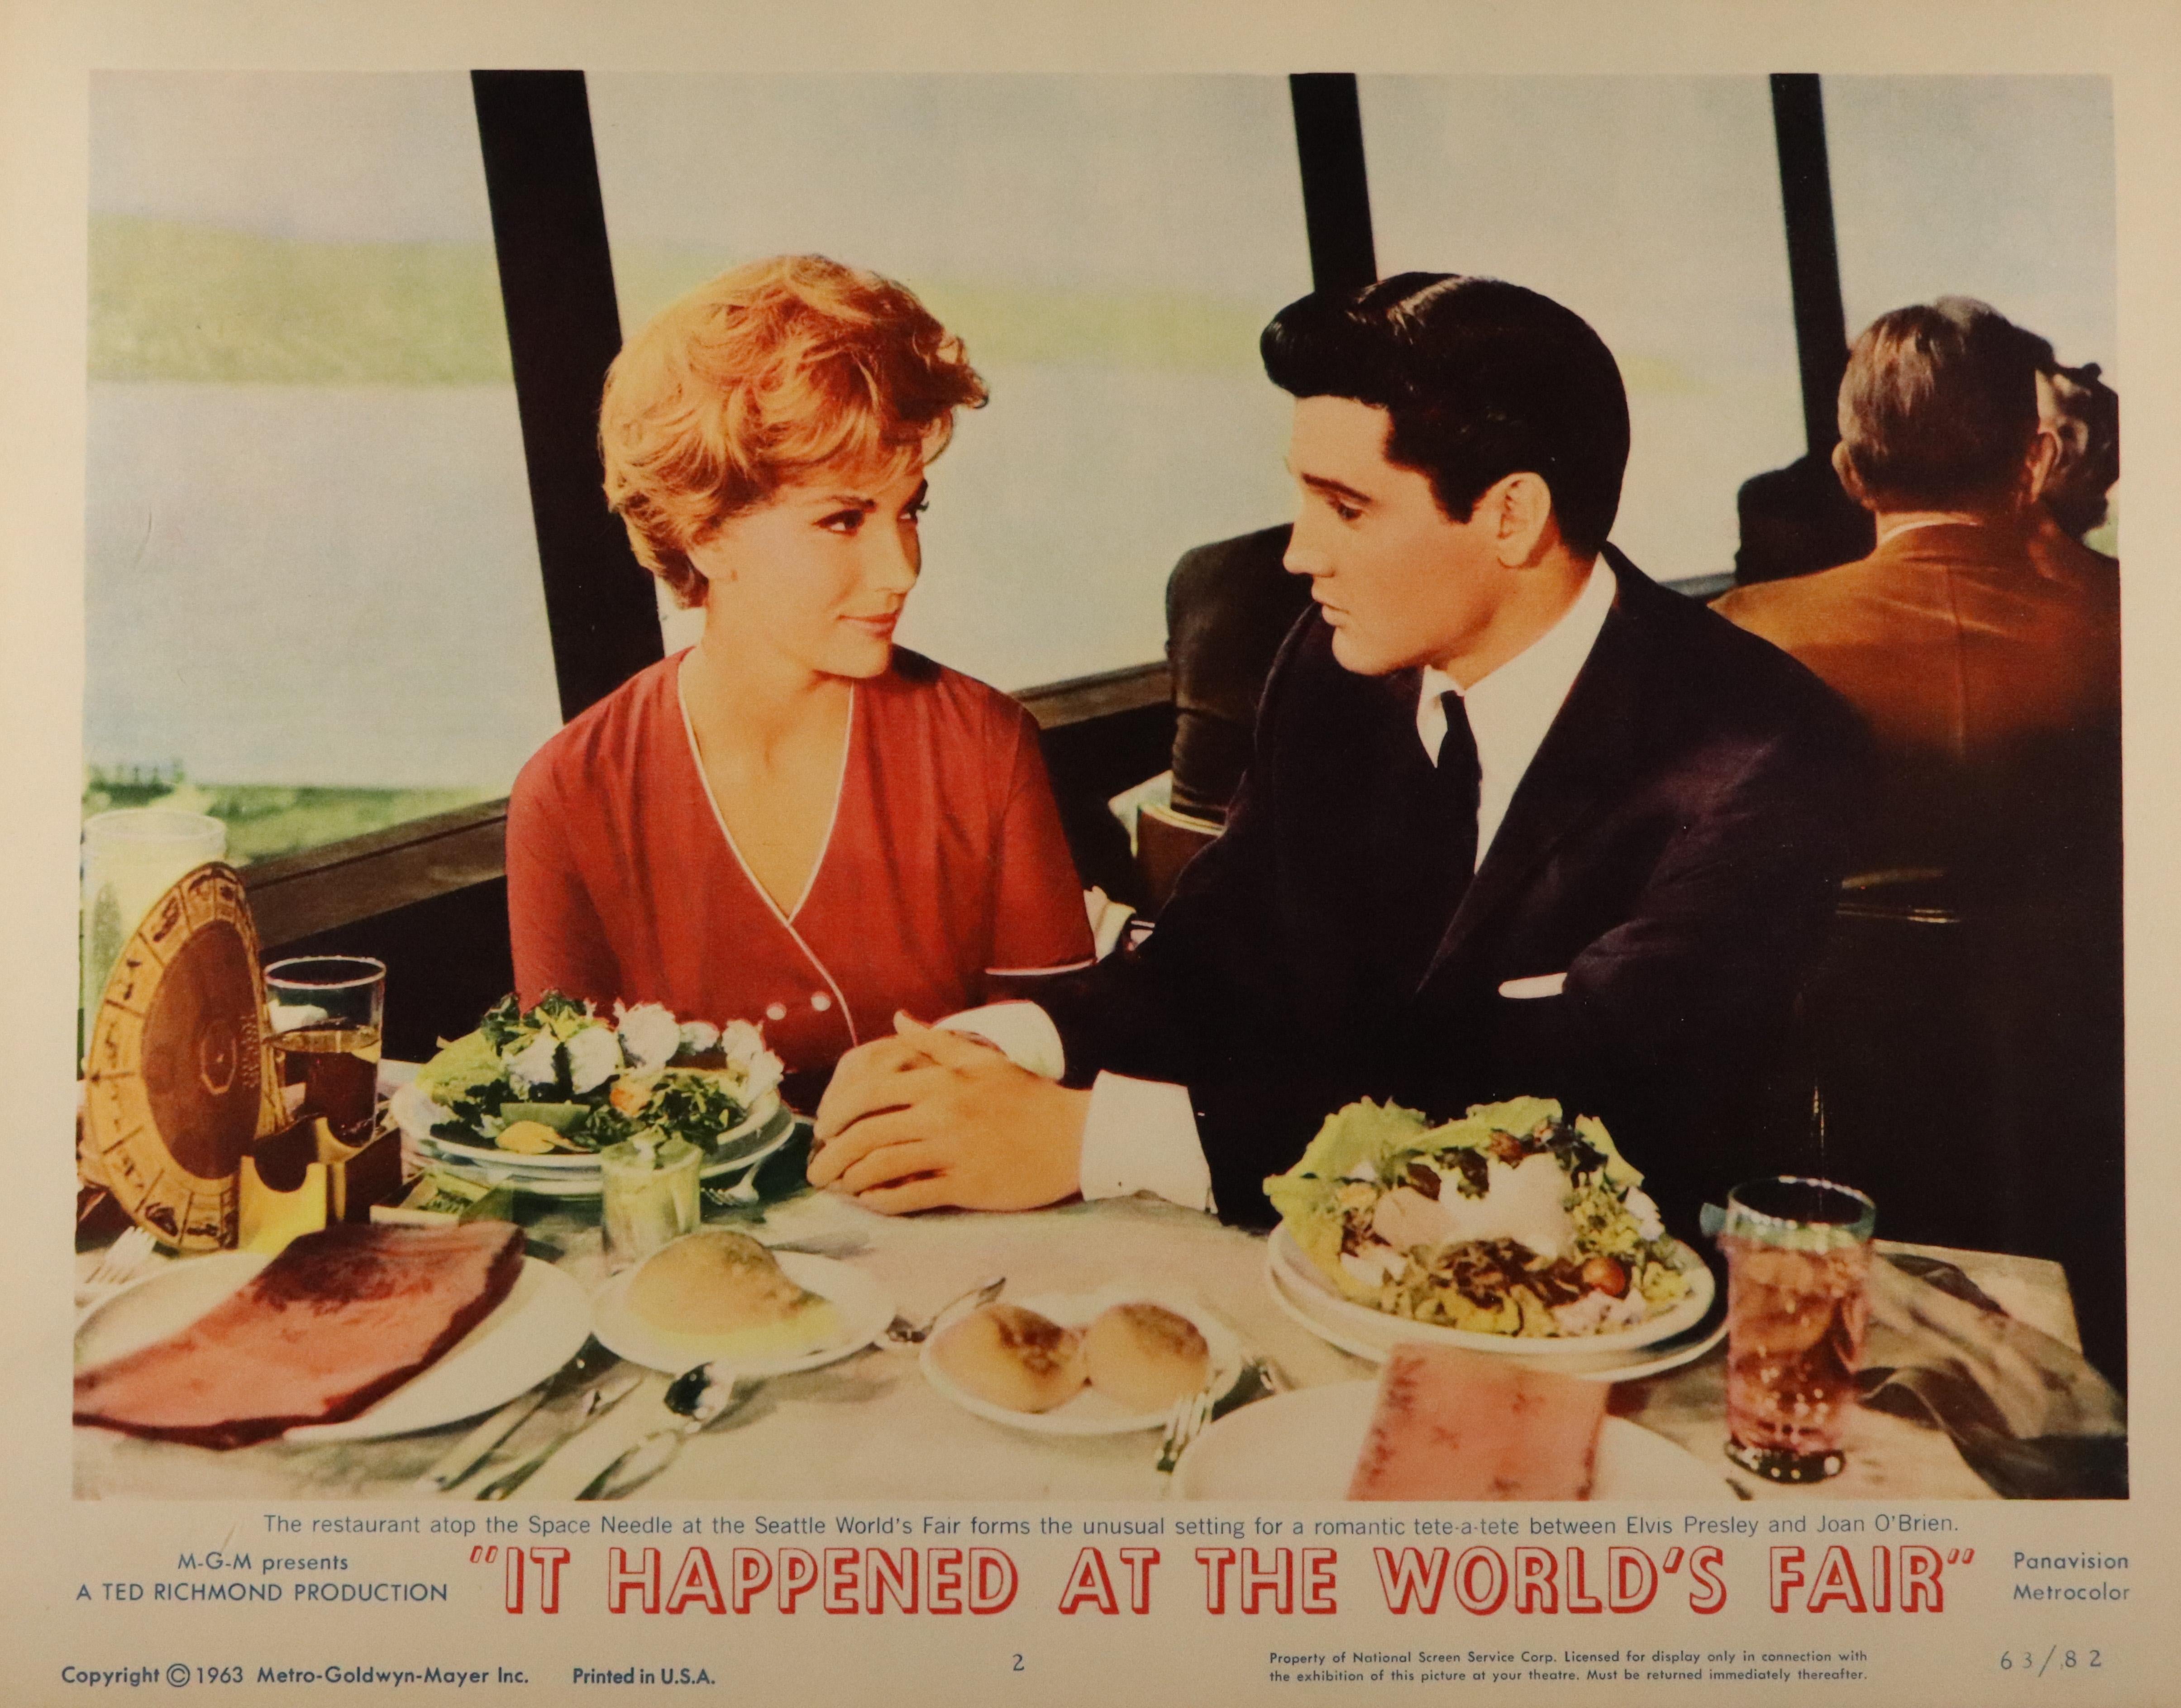 Unknown Interior Print - "It Happened at the World's Fair", Lobby Card, USA 1963